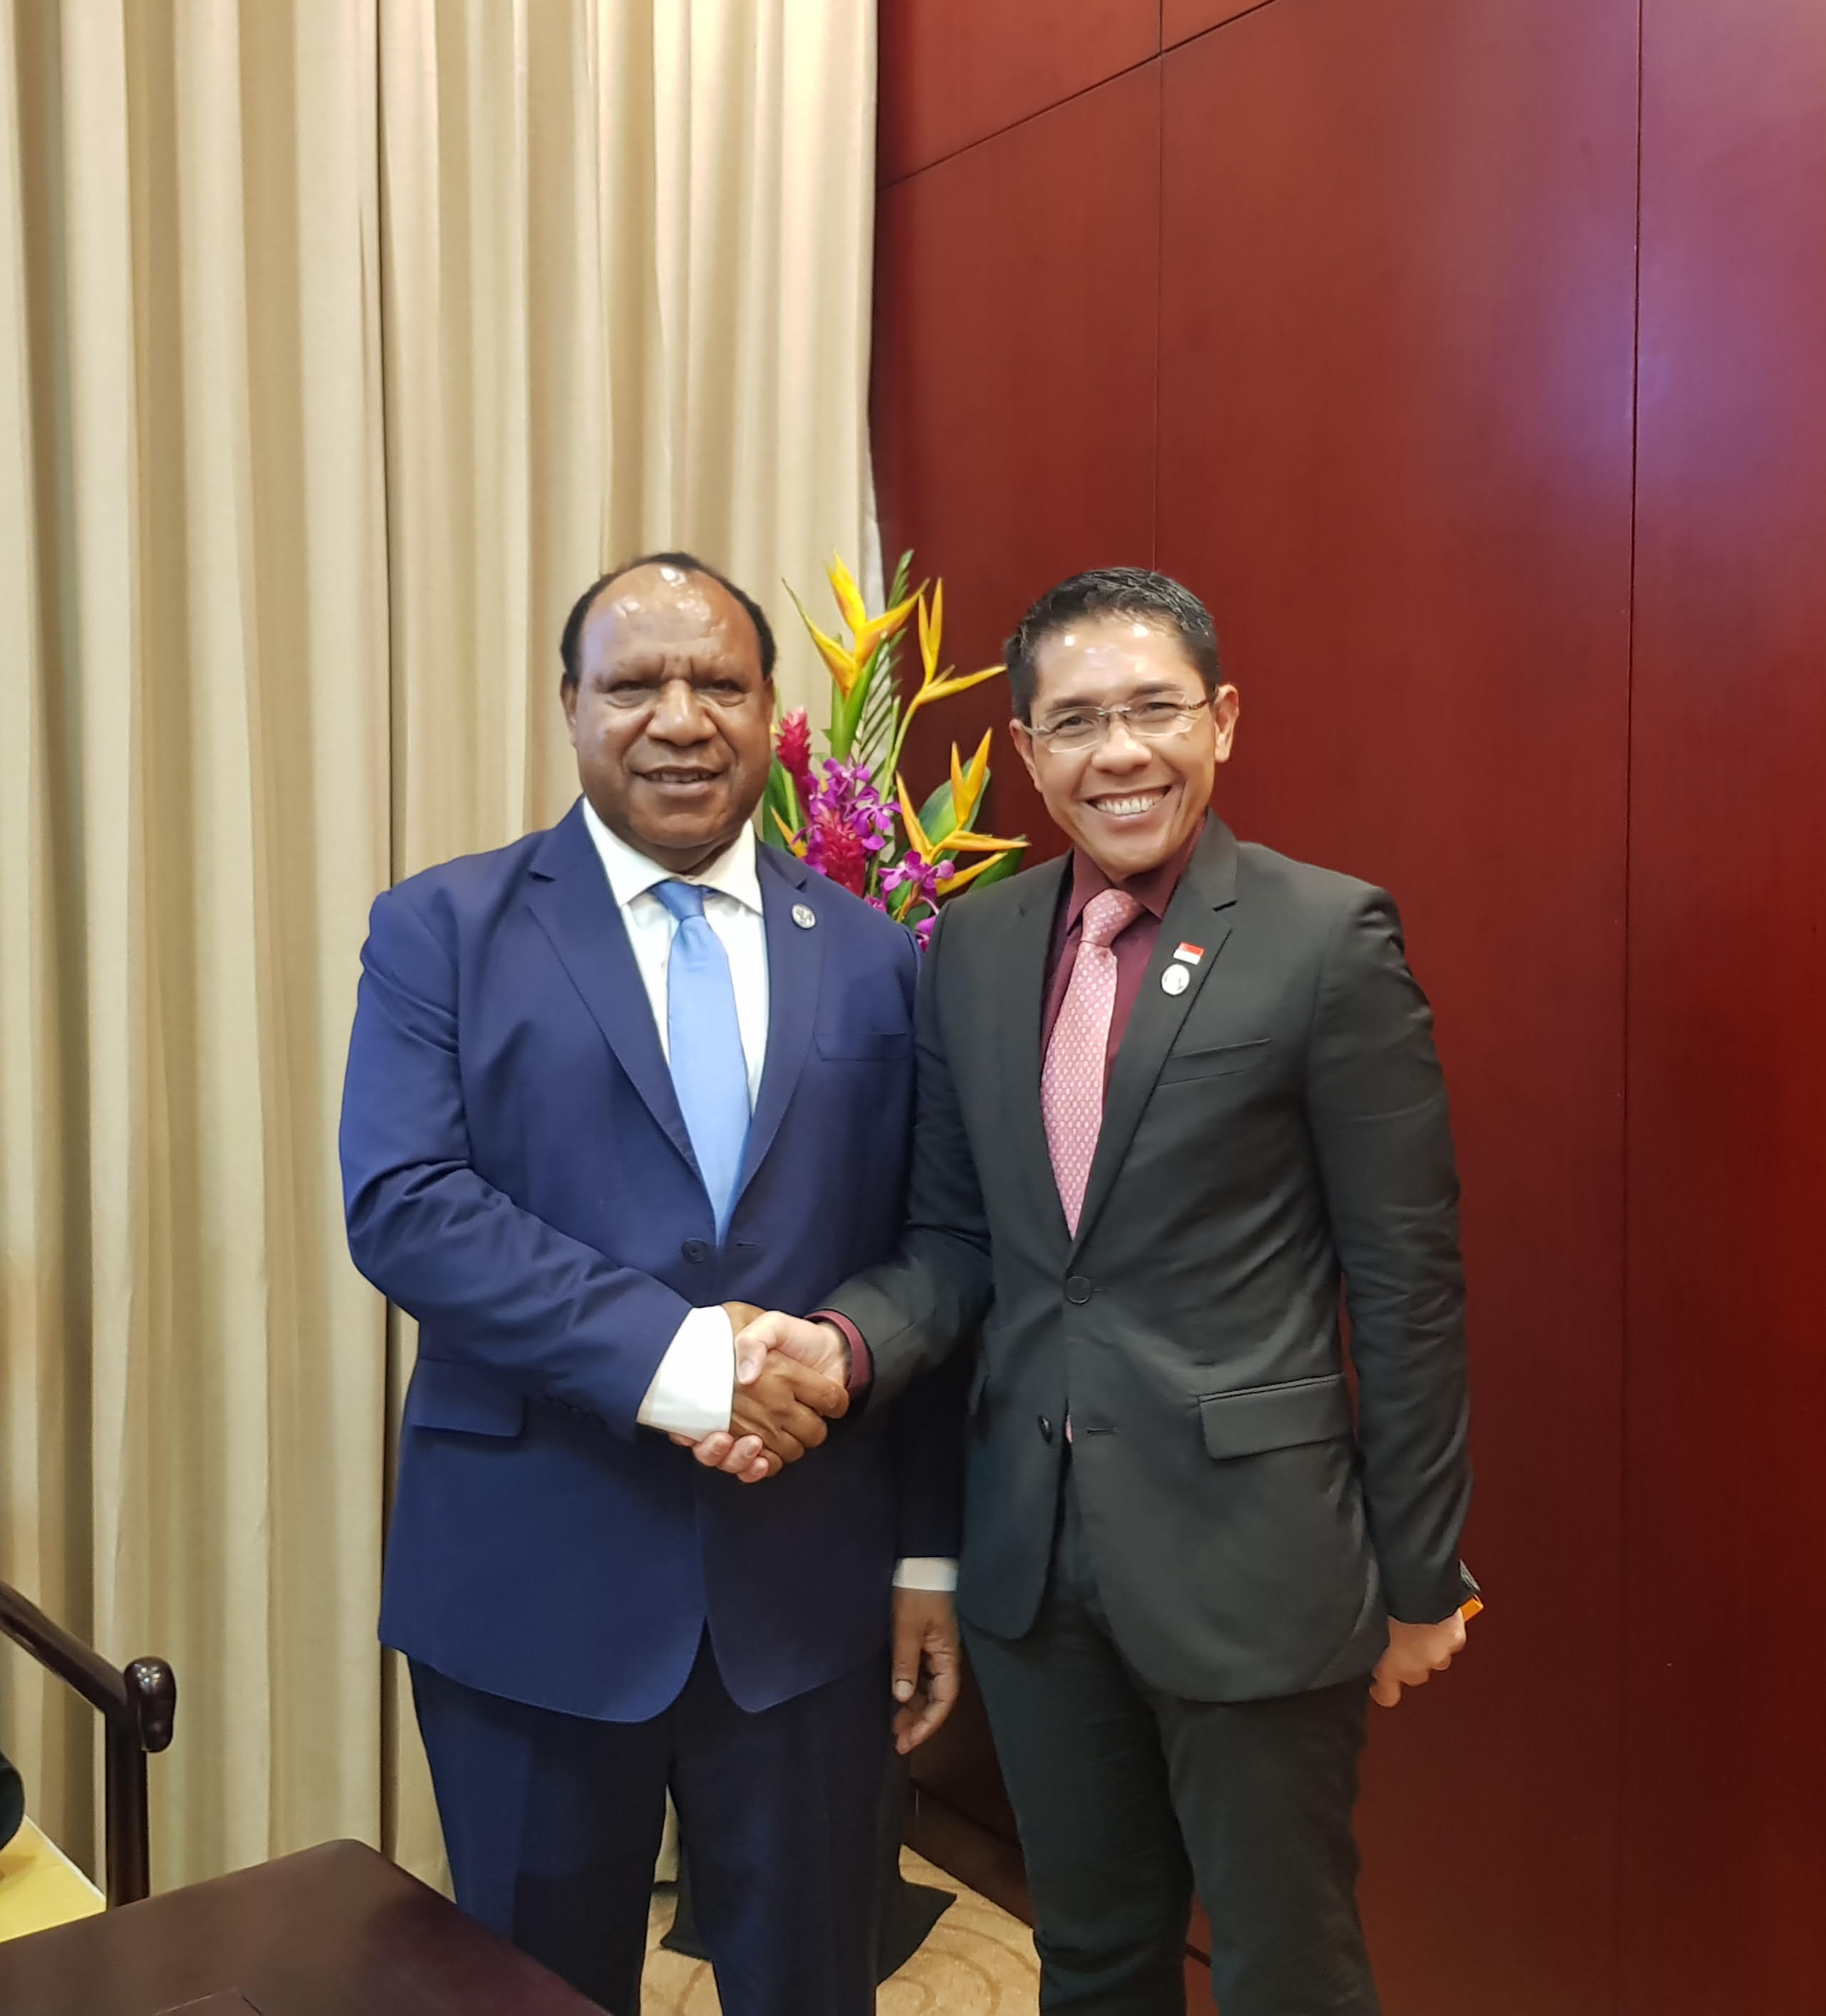 SMS had a bilateral meeting with the host of the APEC Ministerial Meeting Papua New Guinea Minister for Foreign Affairs and Trade Rimbink Pato on 14 November 2018.